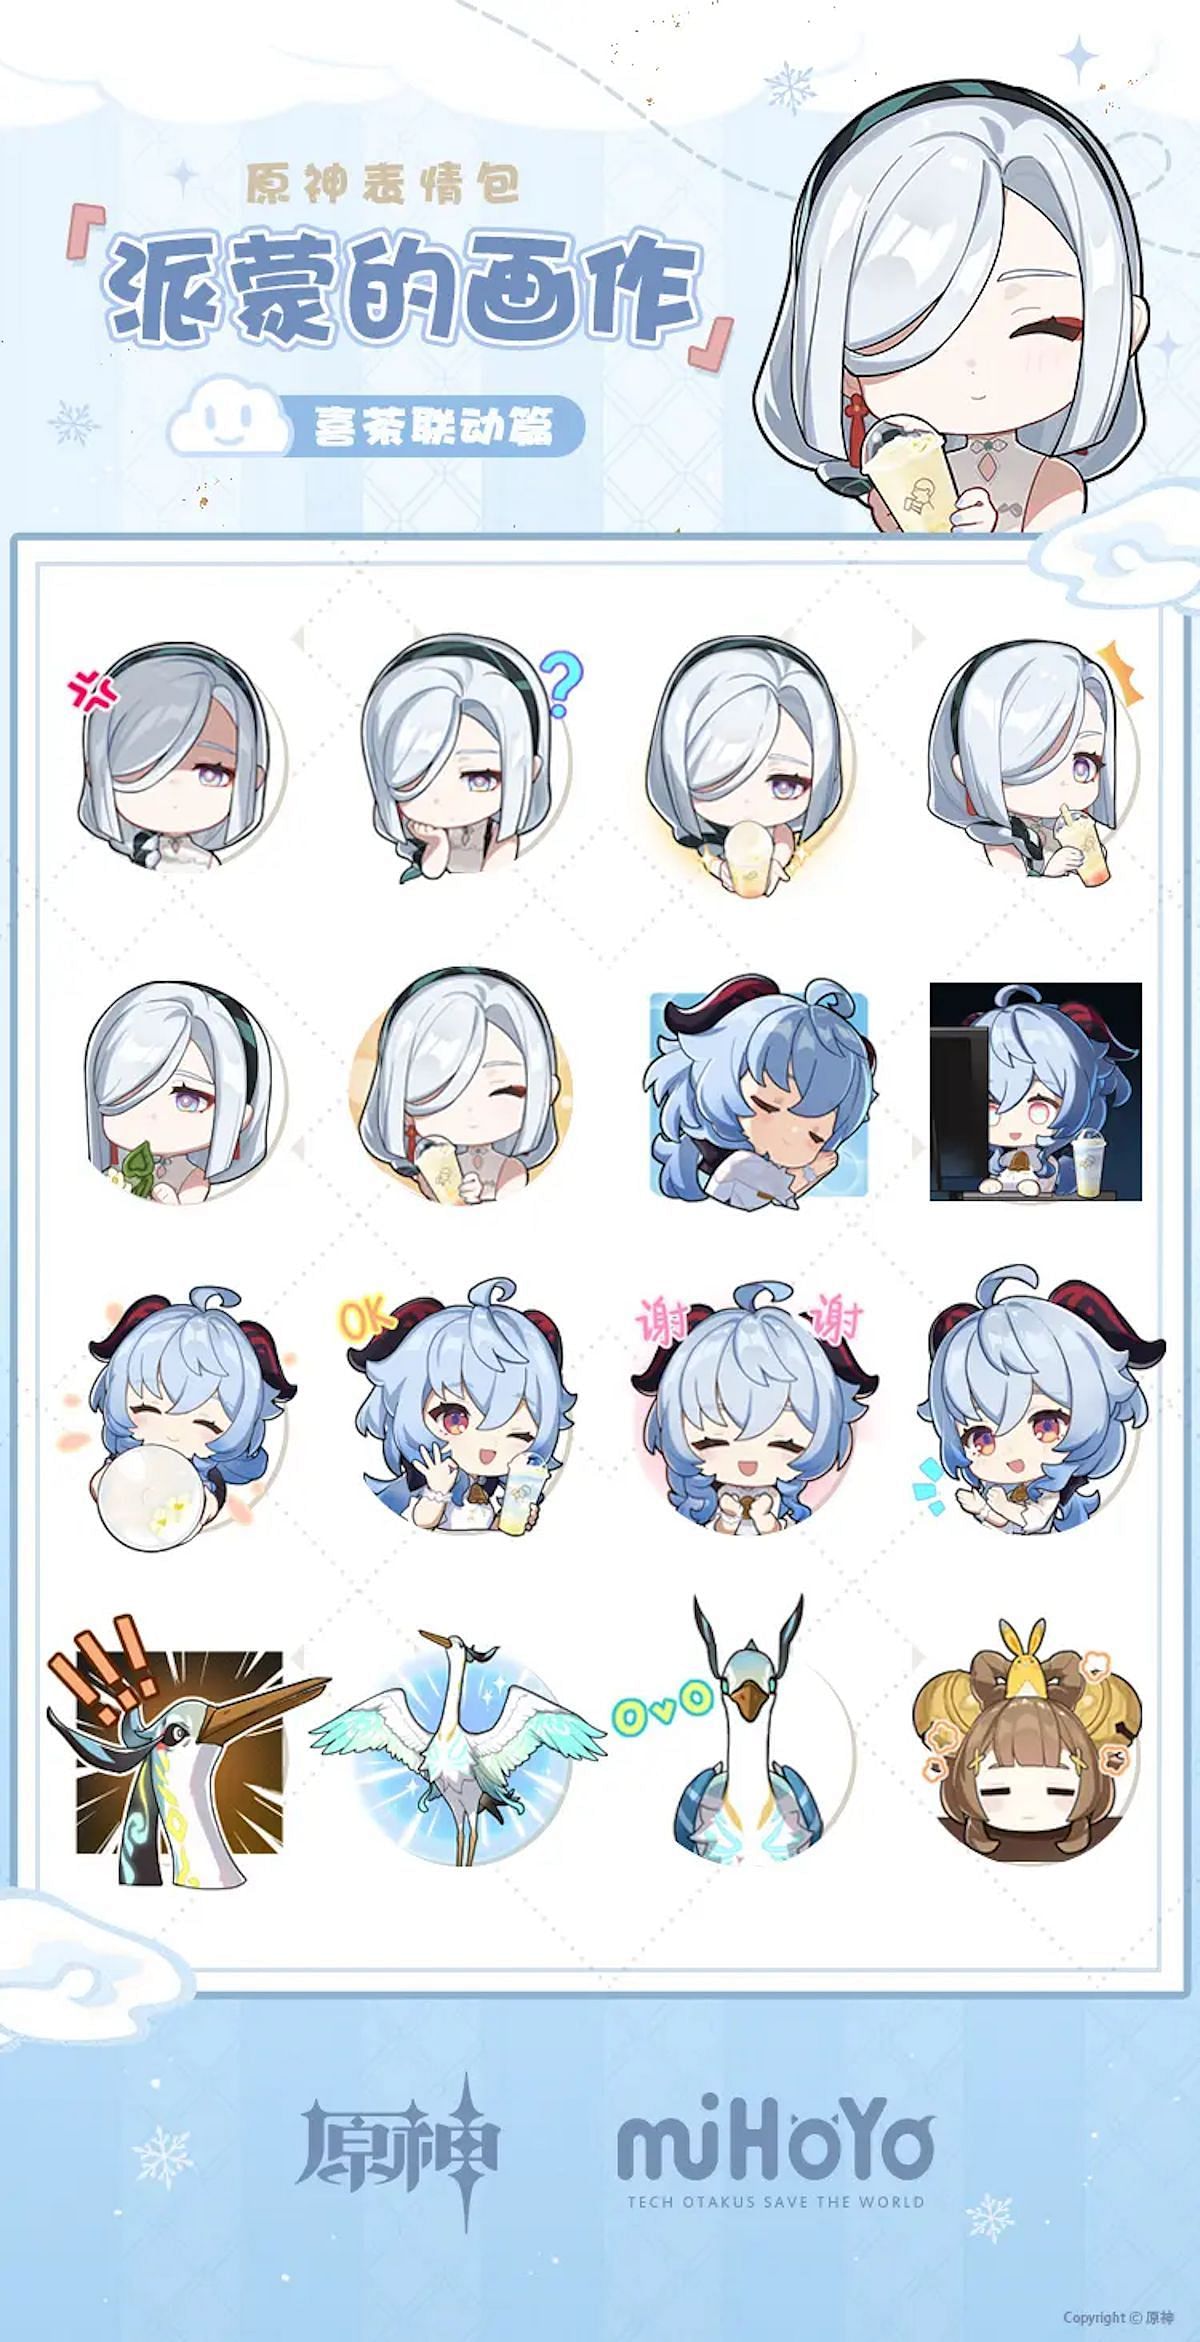 Here are the stickers (Image via miHoYo)